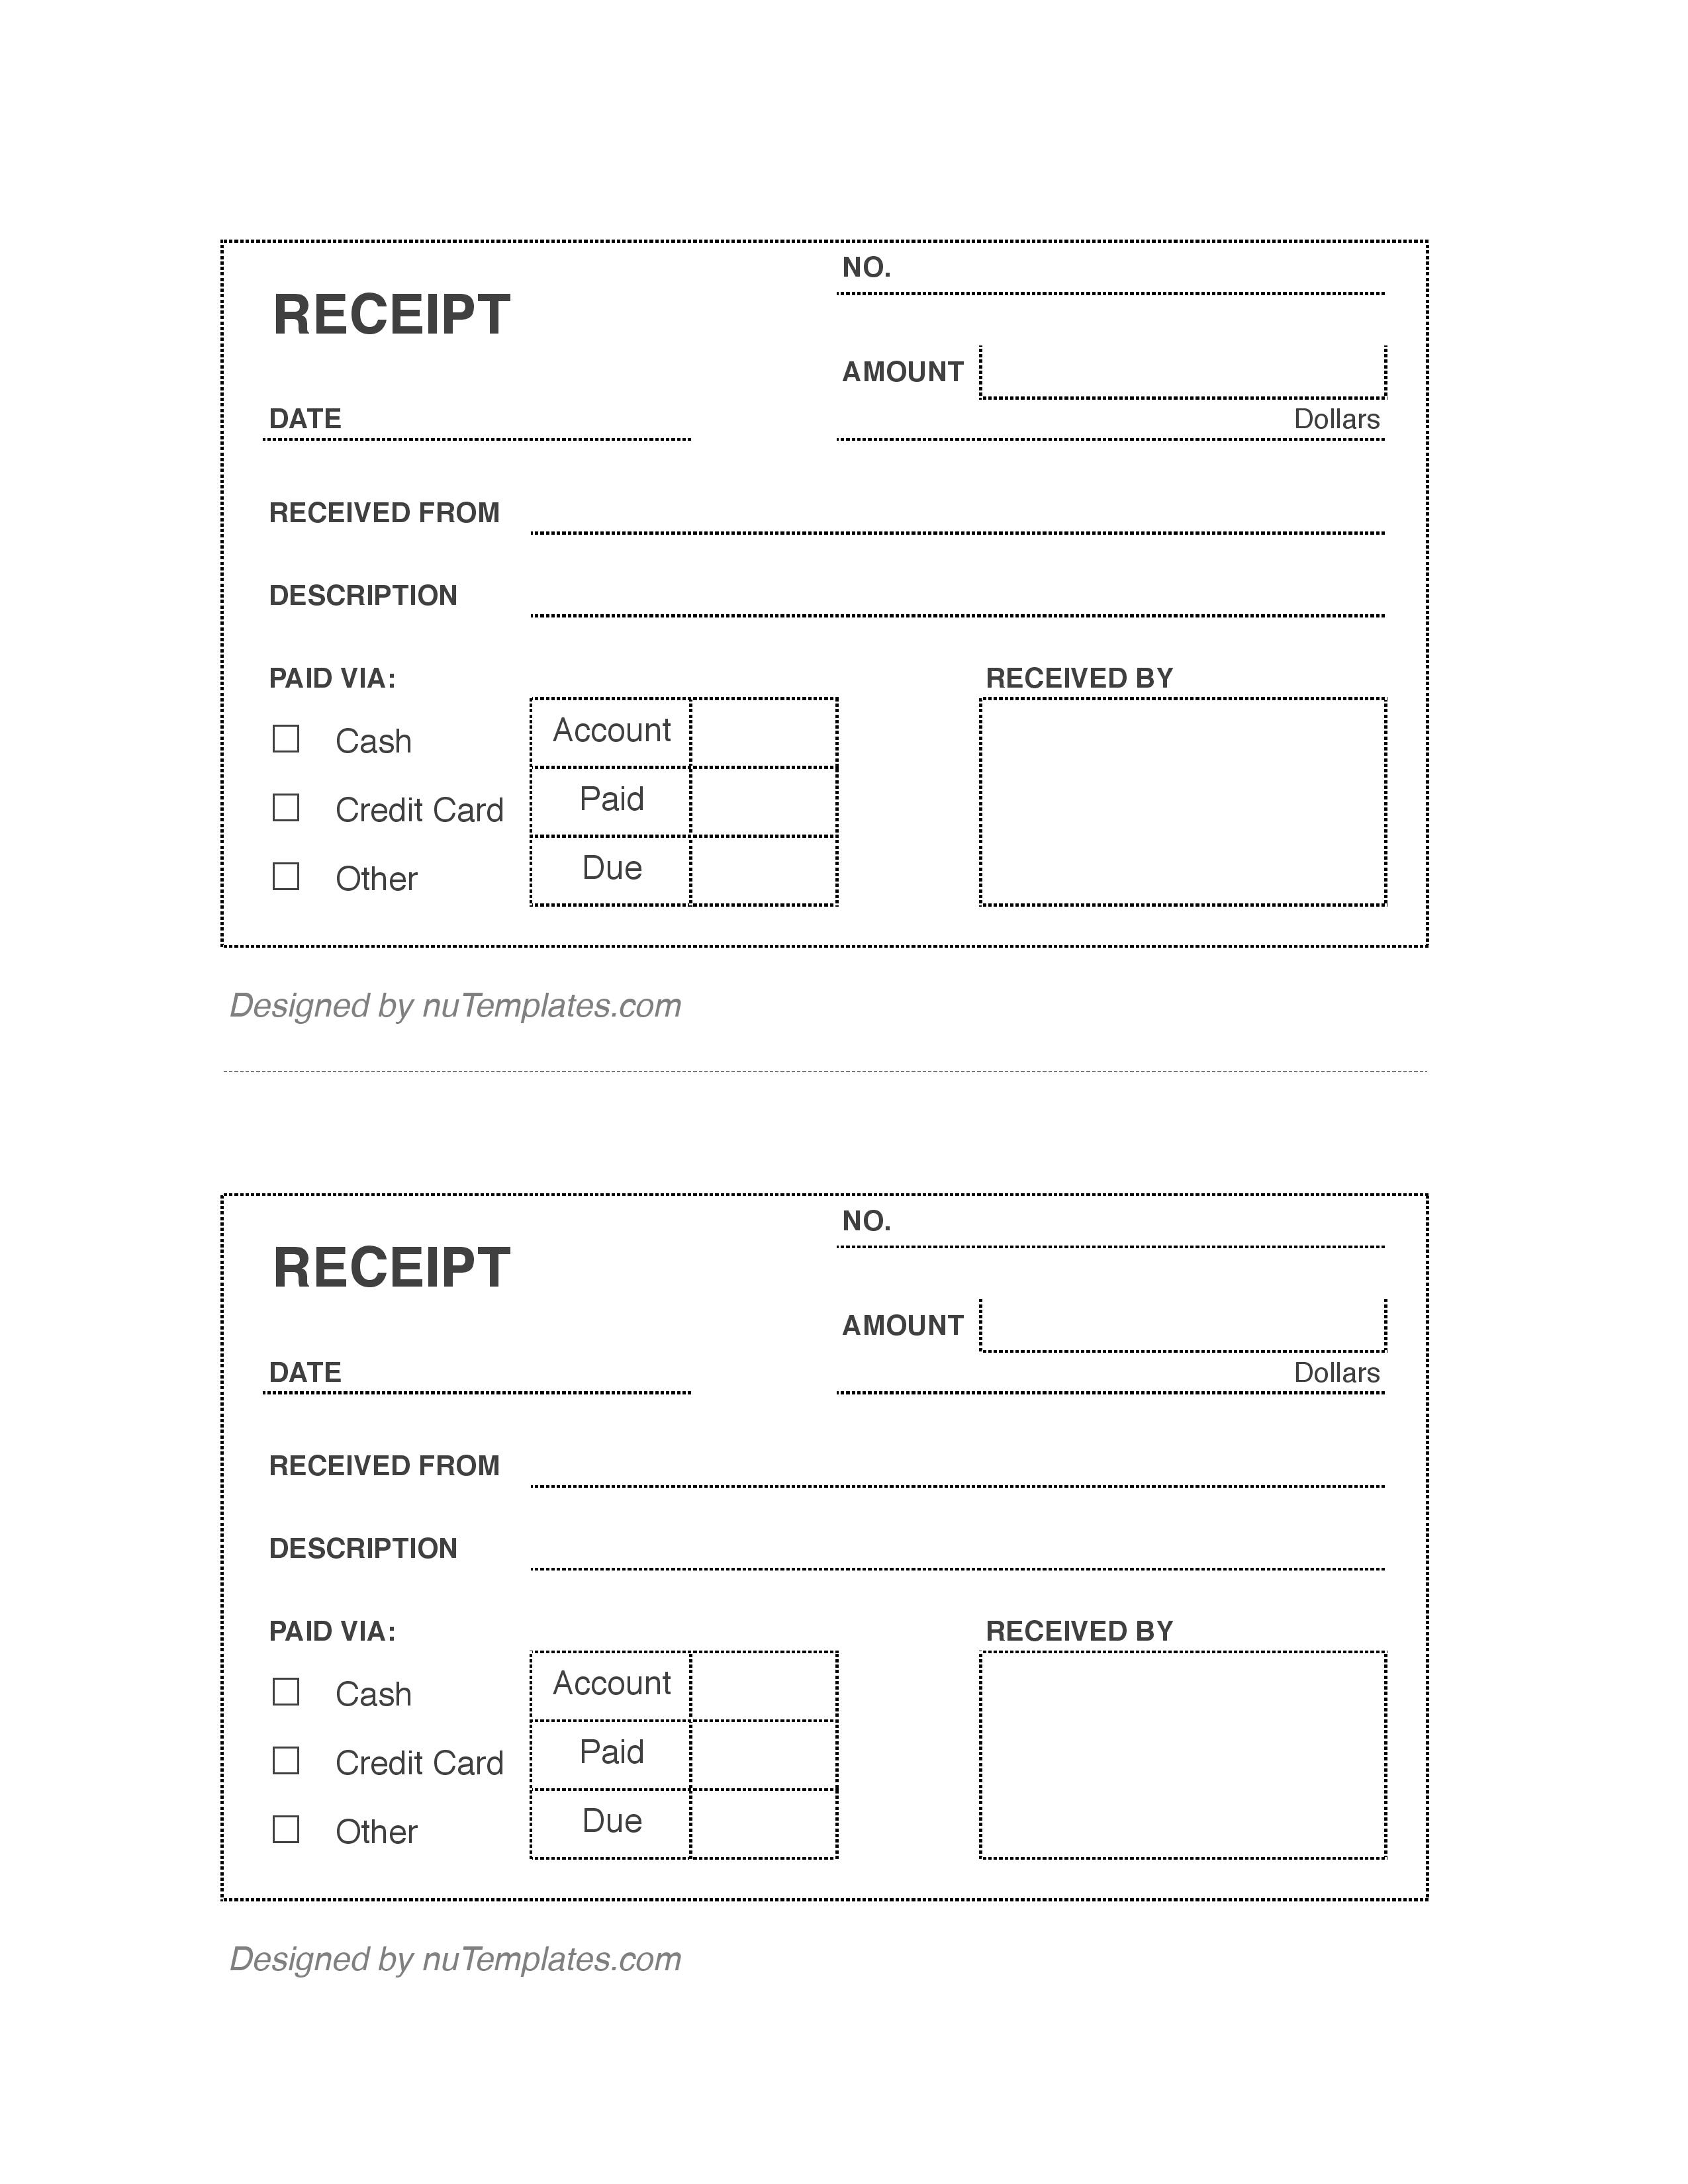 Receipt Template Work Done Simple Receipt Forms